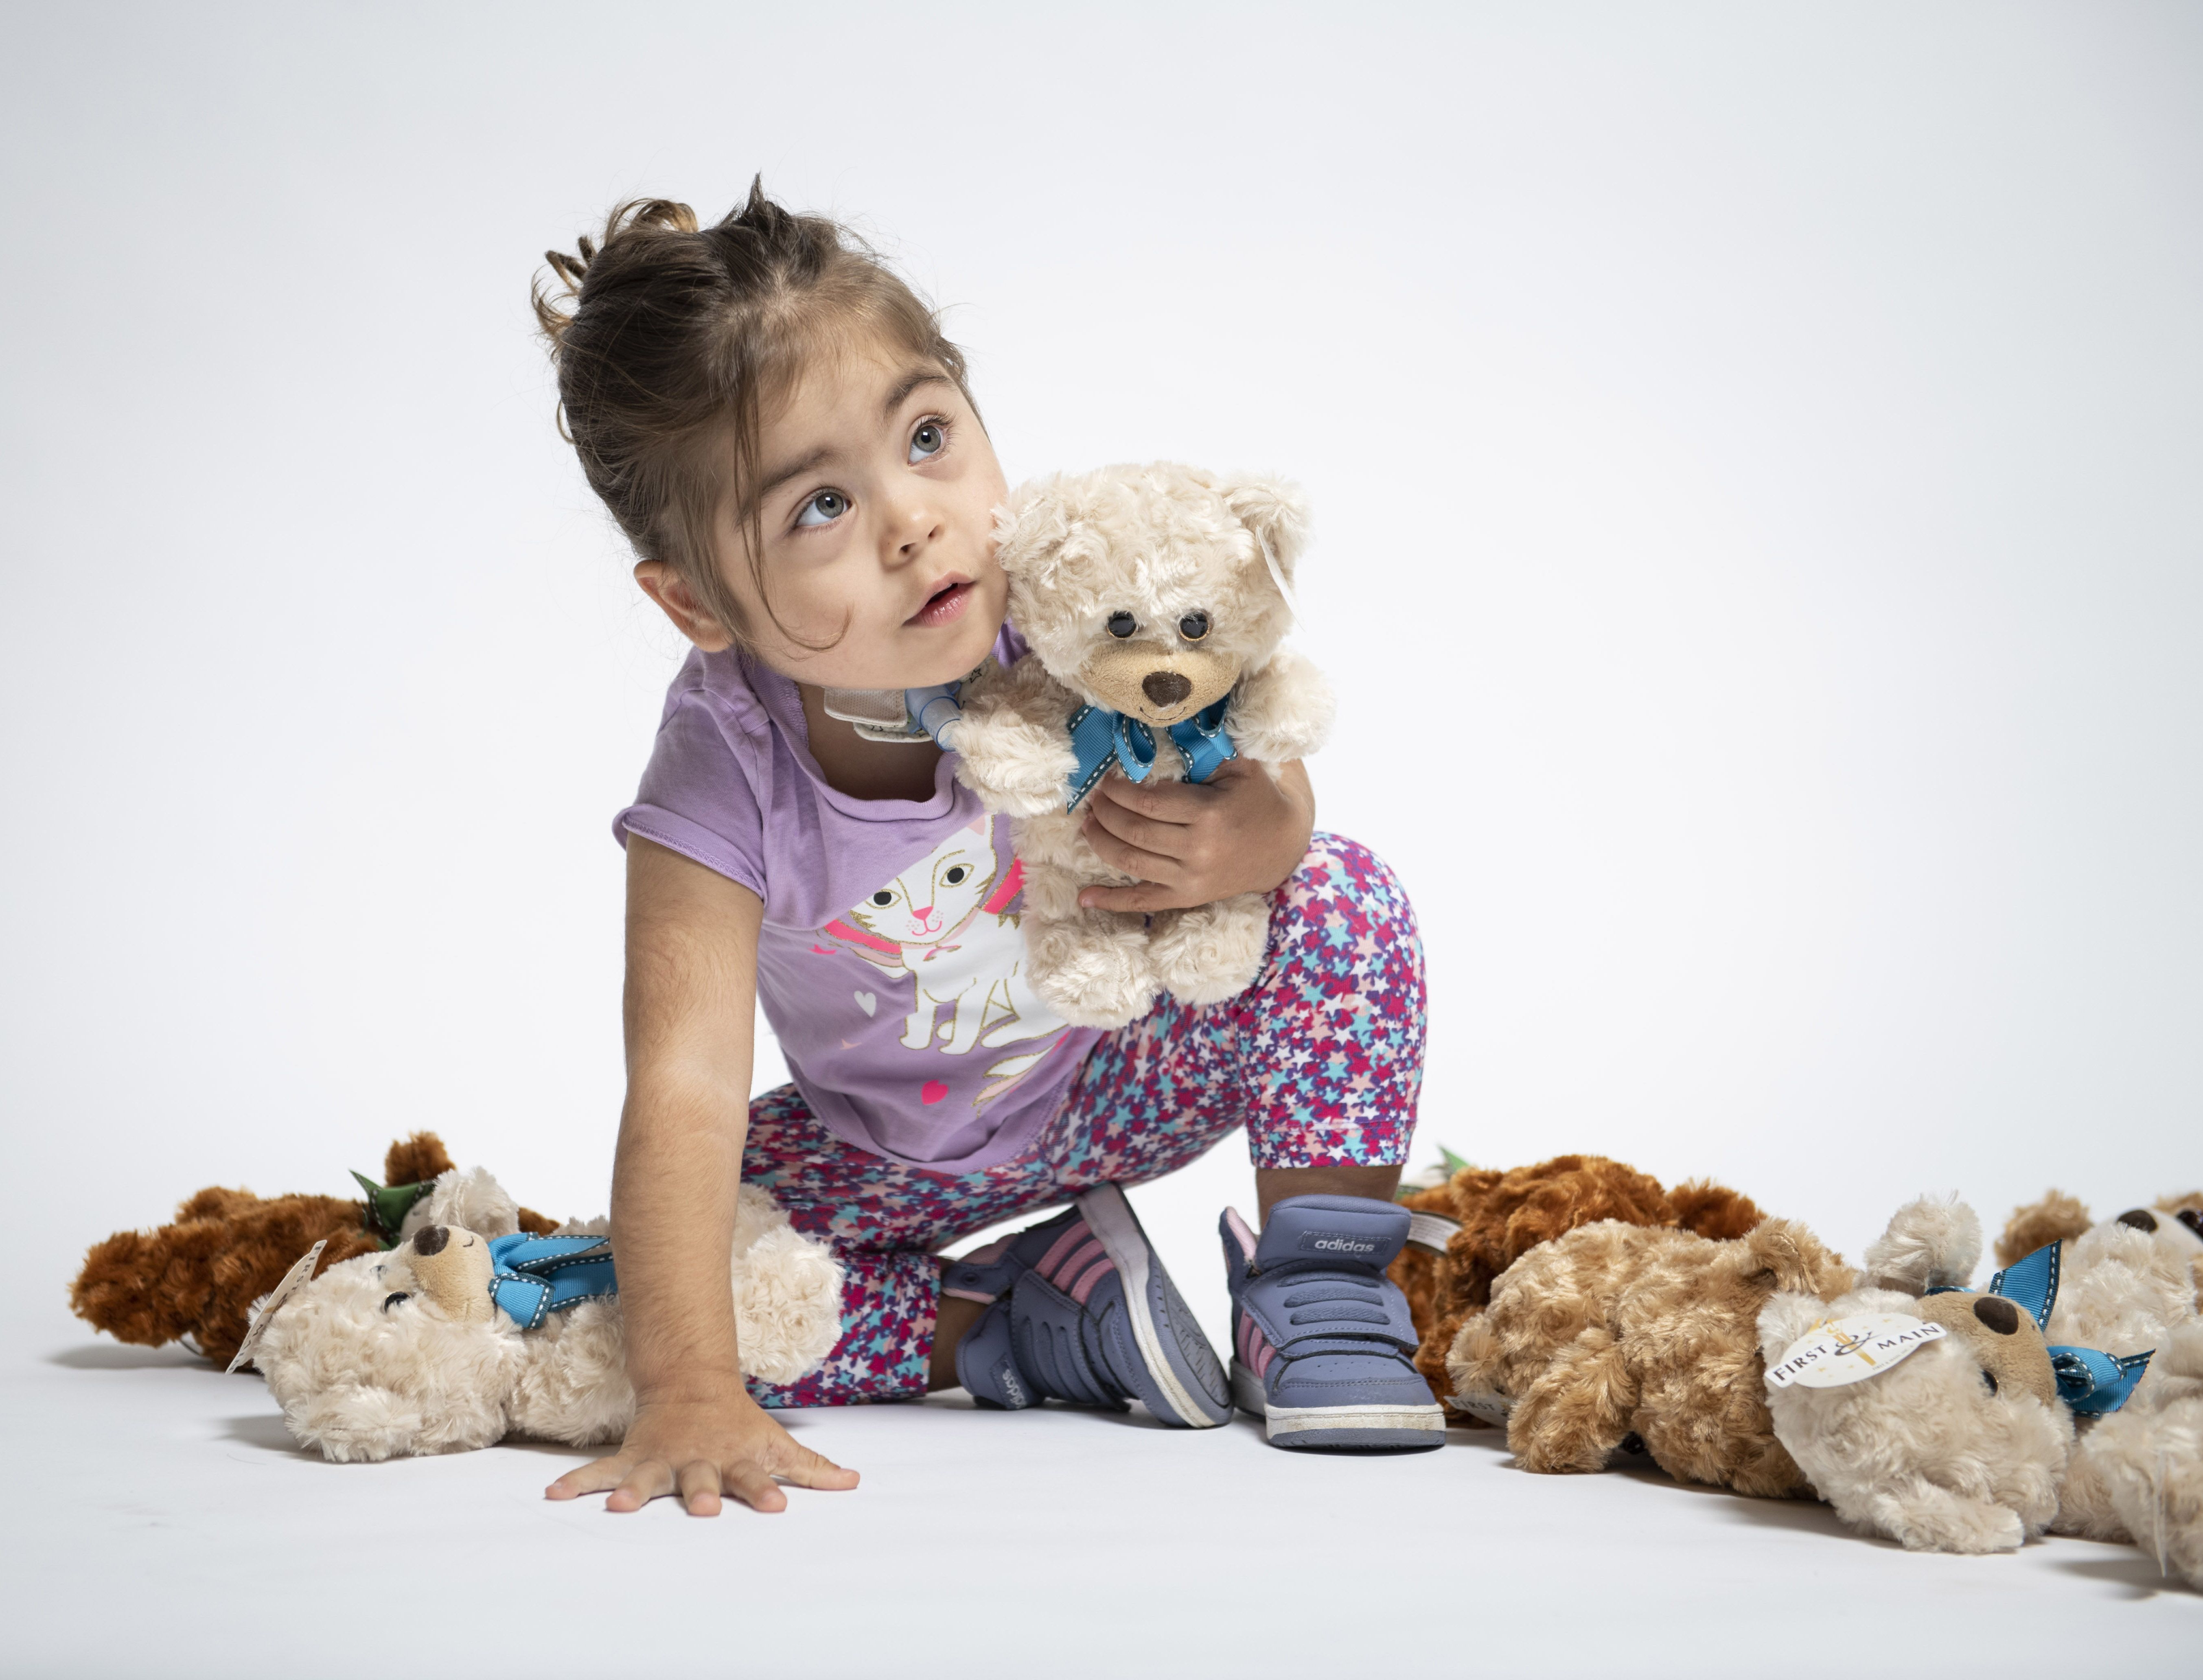 image of child with teddy bears